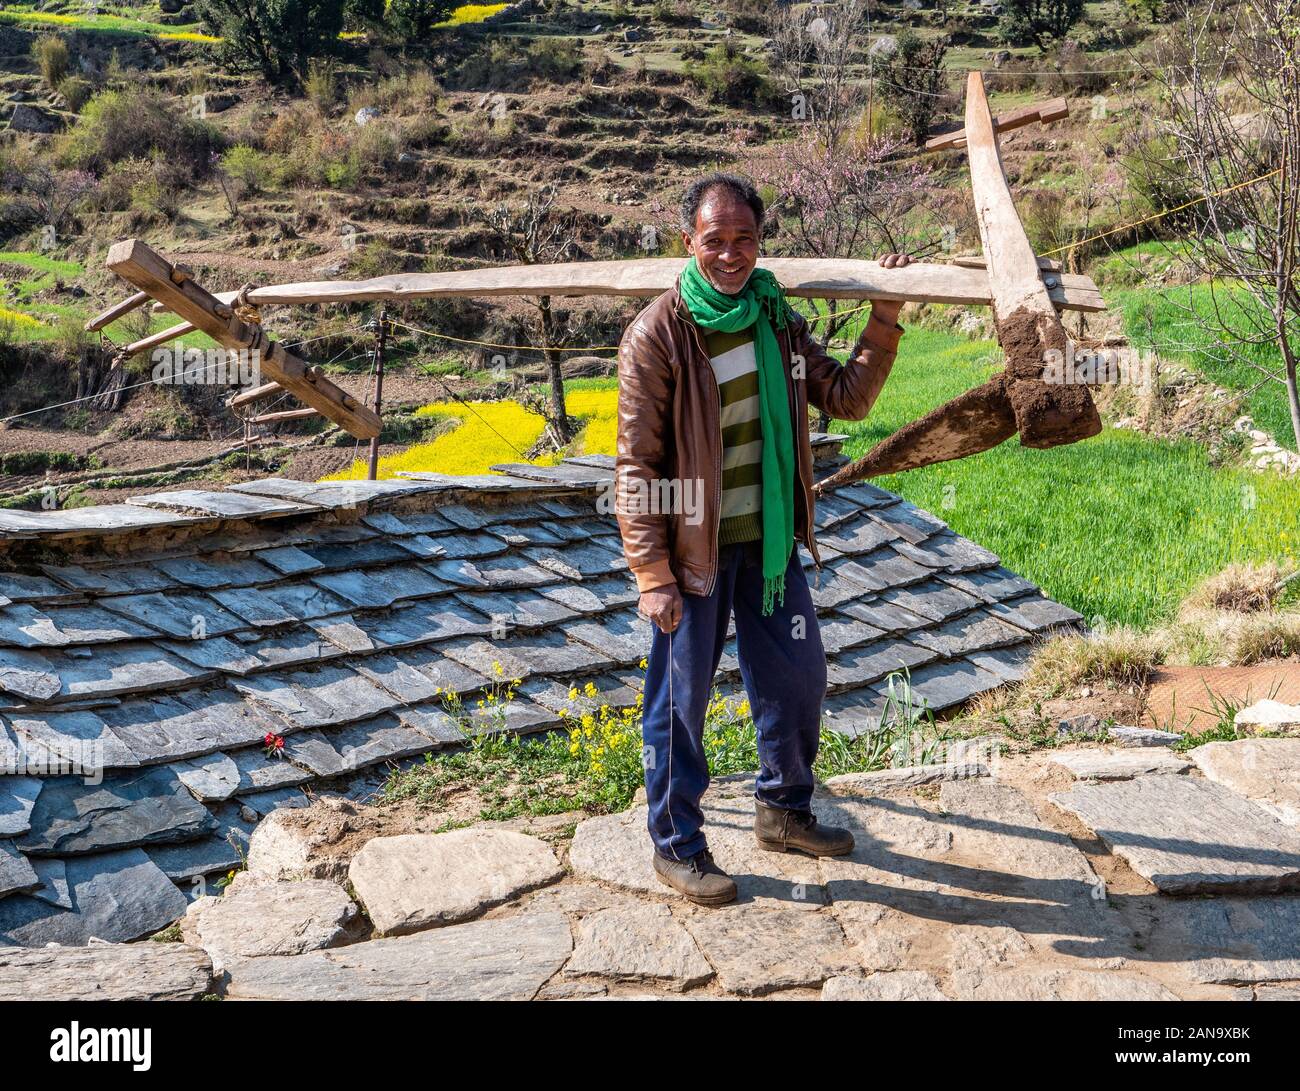 A villager of Dhurr in the Pindar Valley of Northern India casually carrying a heavy plough up a steep slope through the village Stock Photo